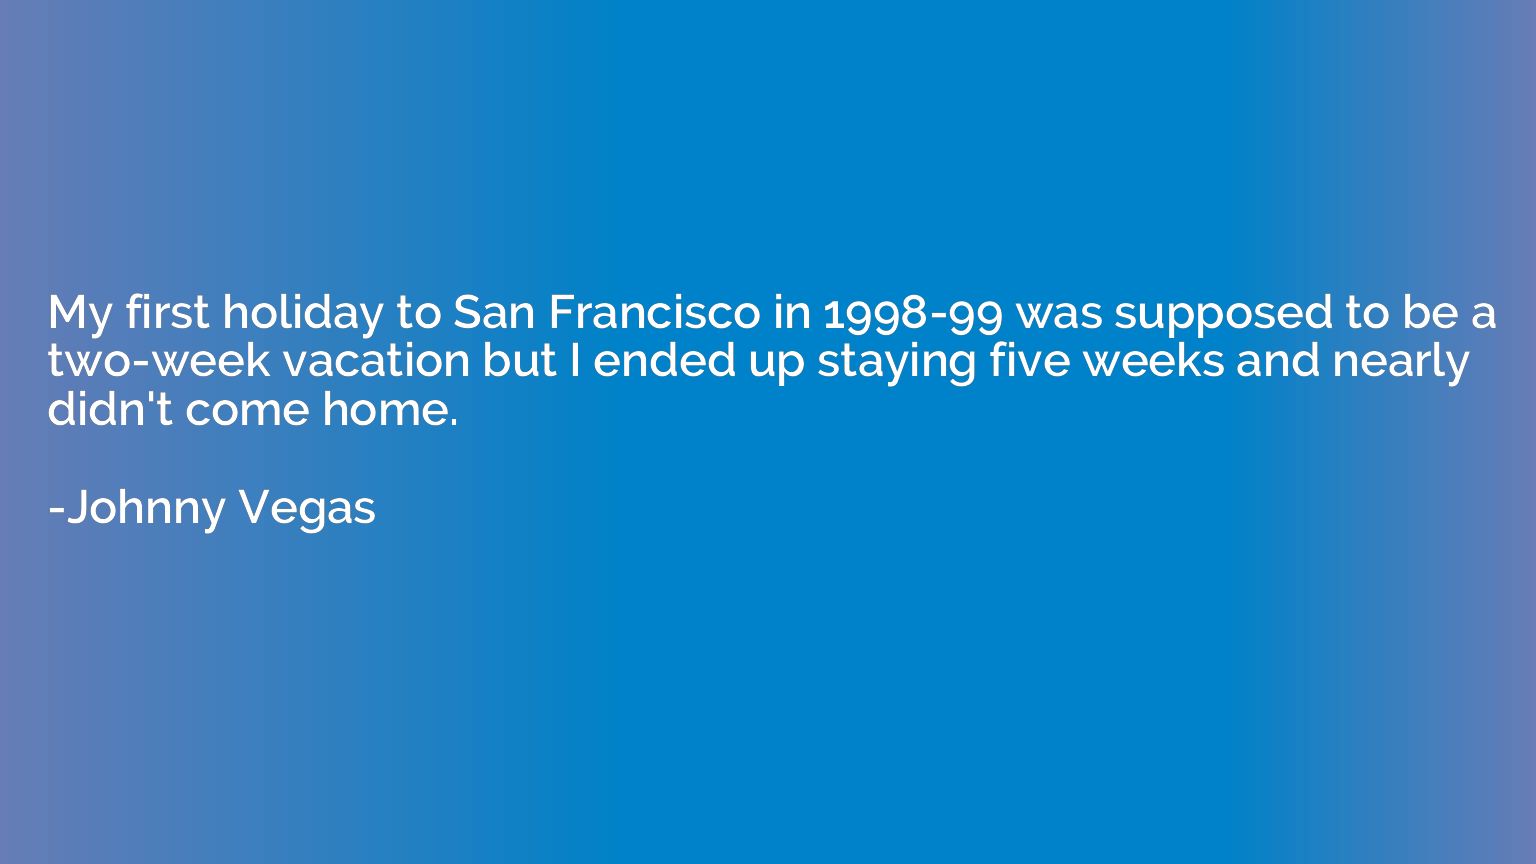 My first holiday to San Francisco in 1998-99 was supposed to